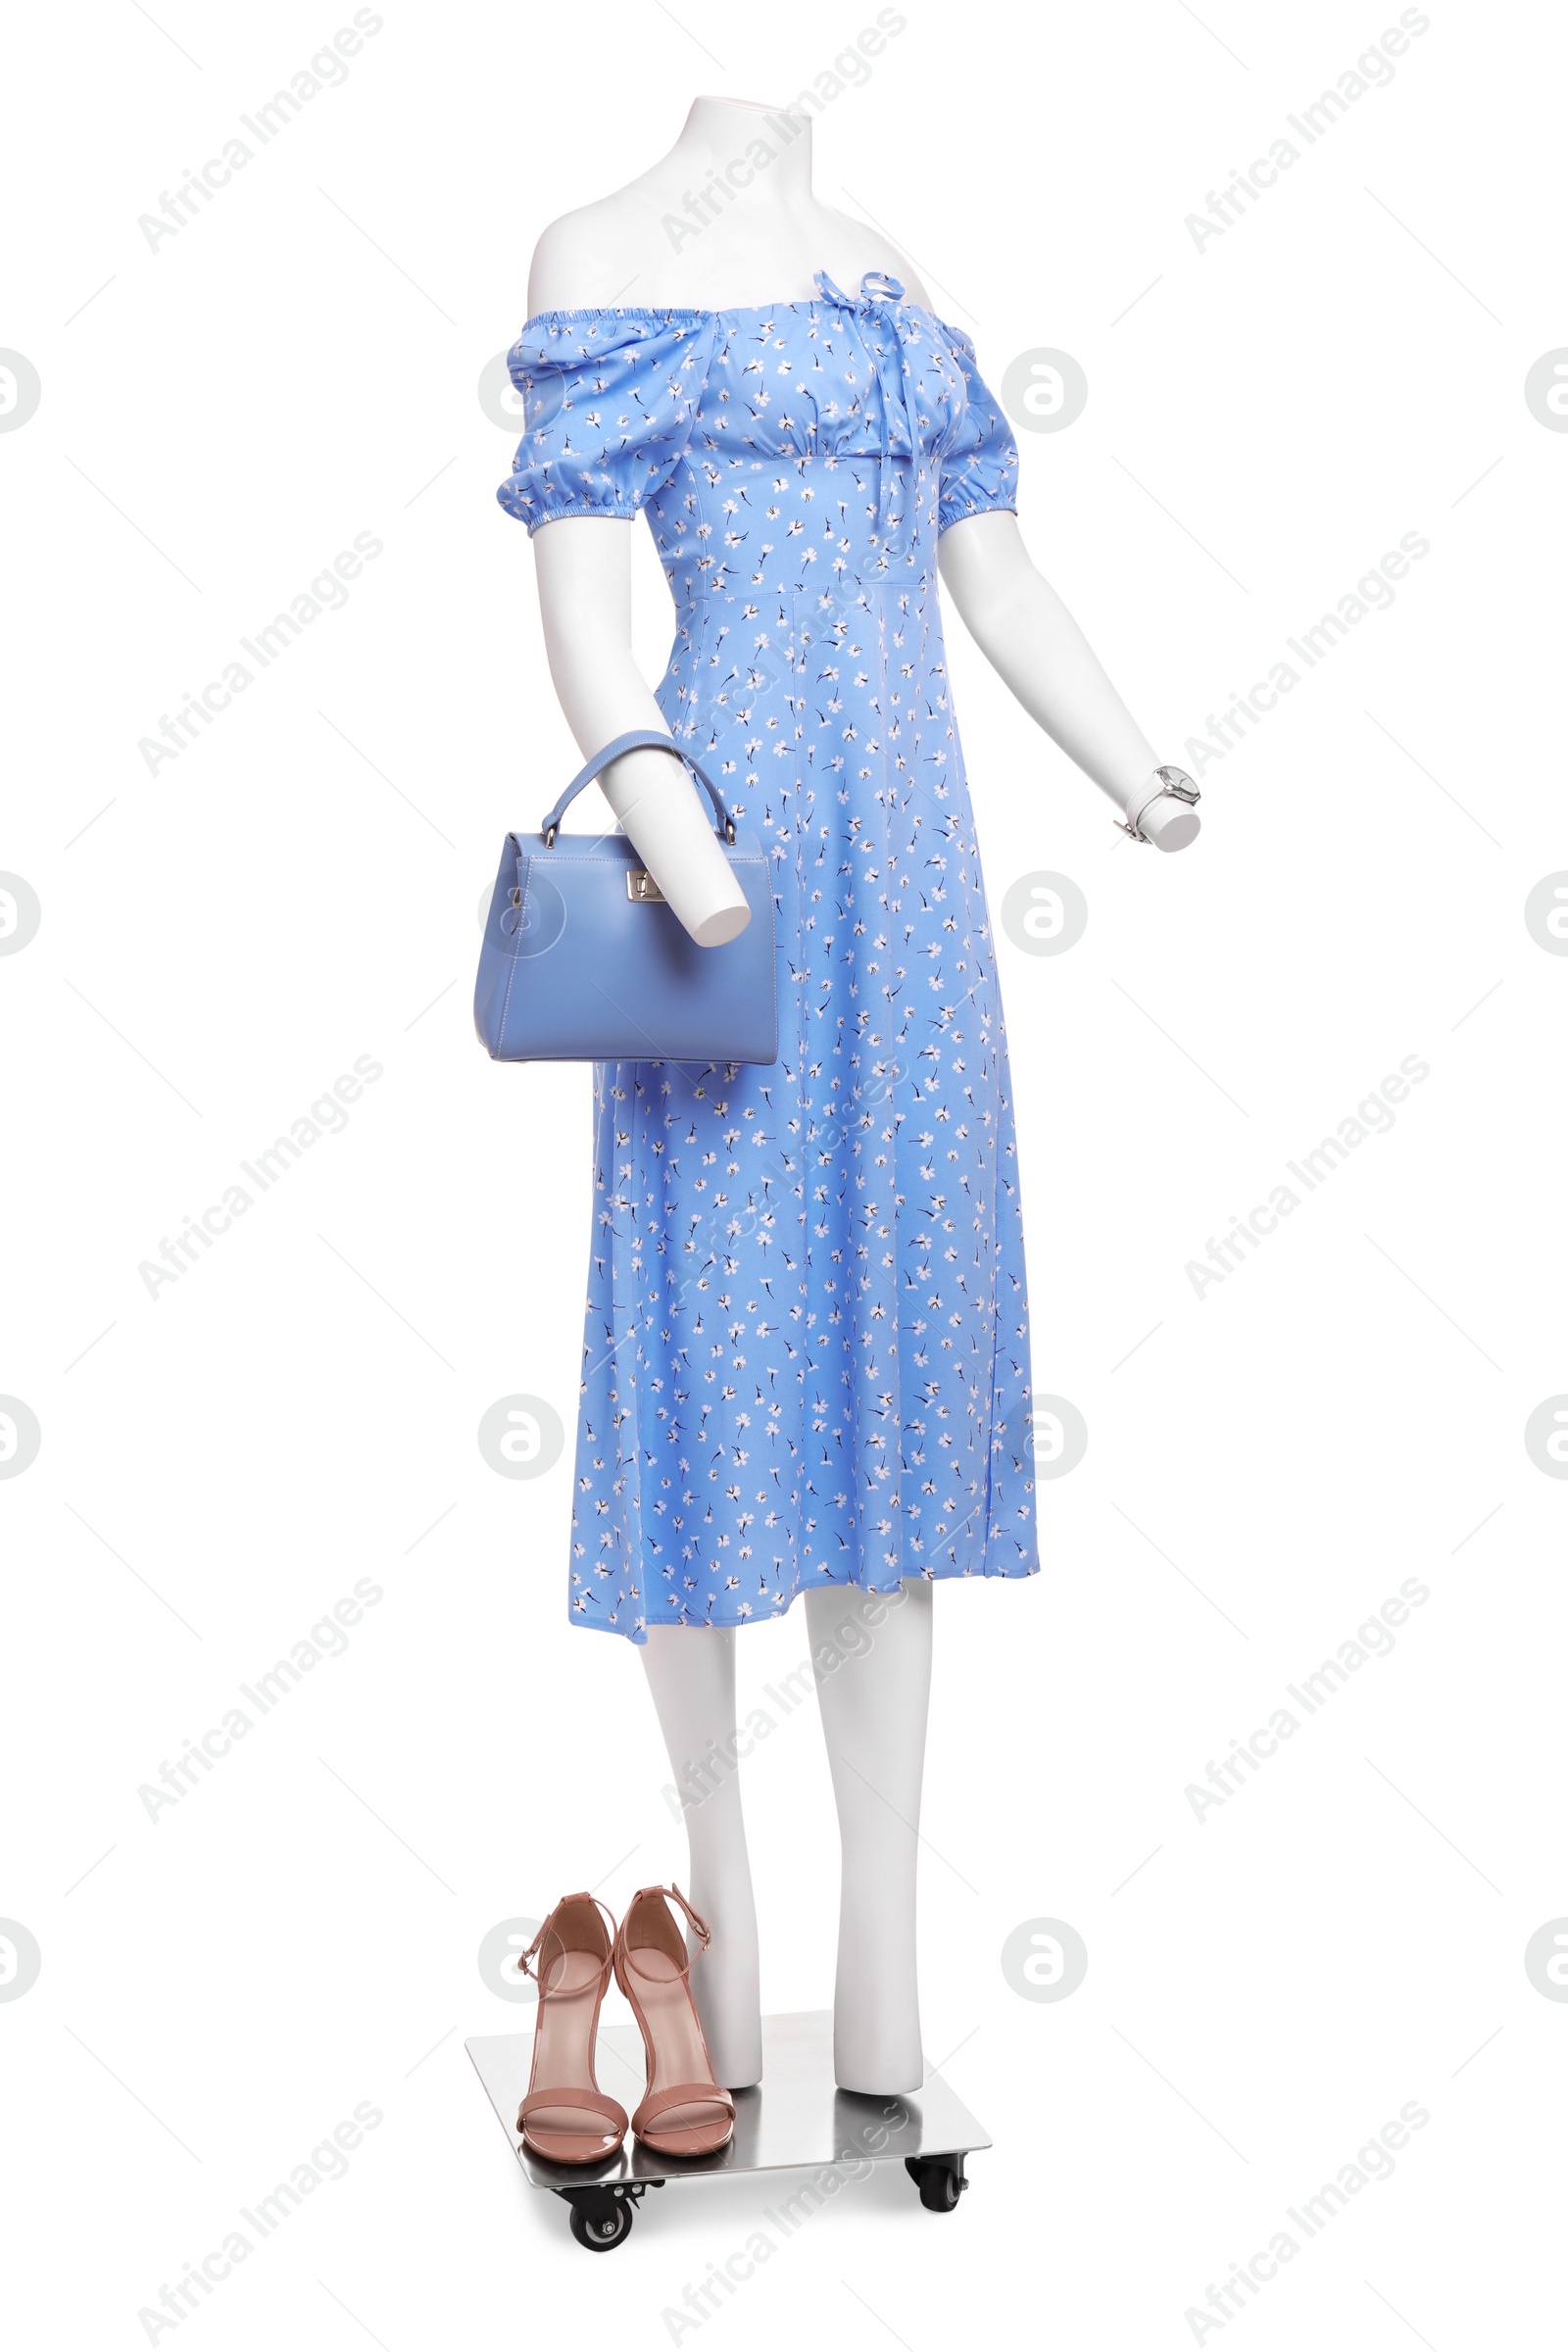 Photo of Female mannequin with accessories dressed in stylish light blue dress isolated on white